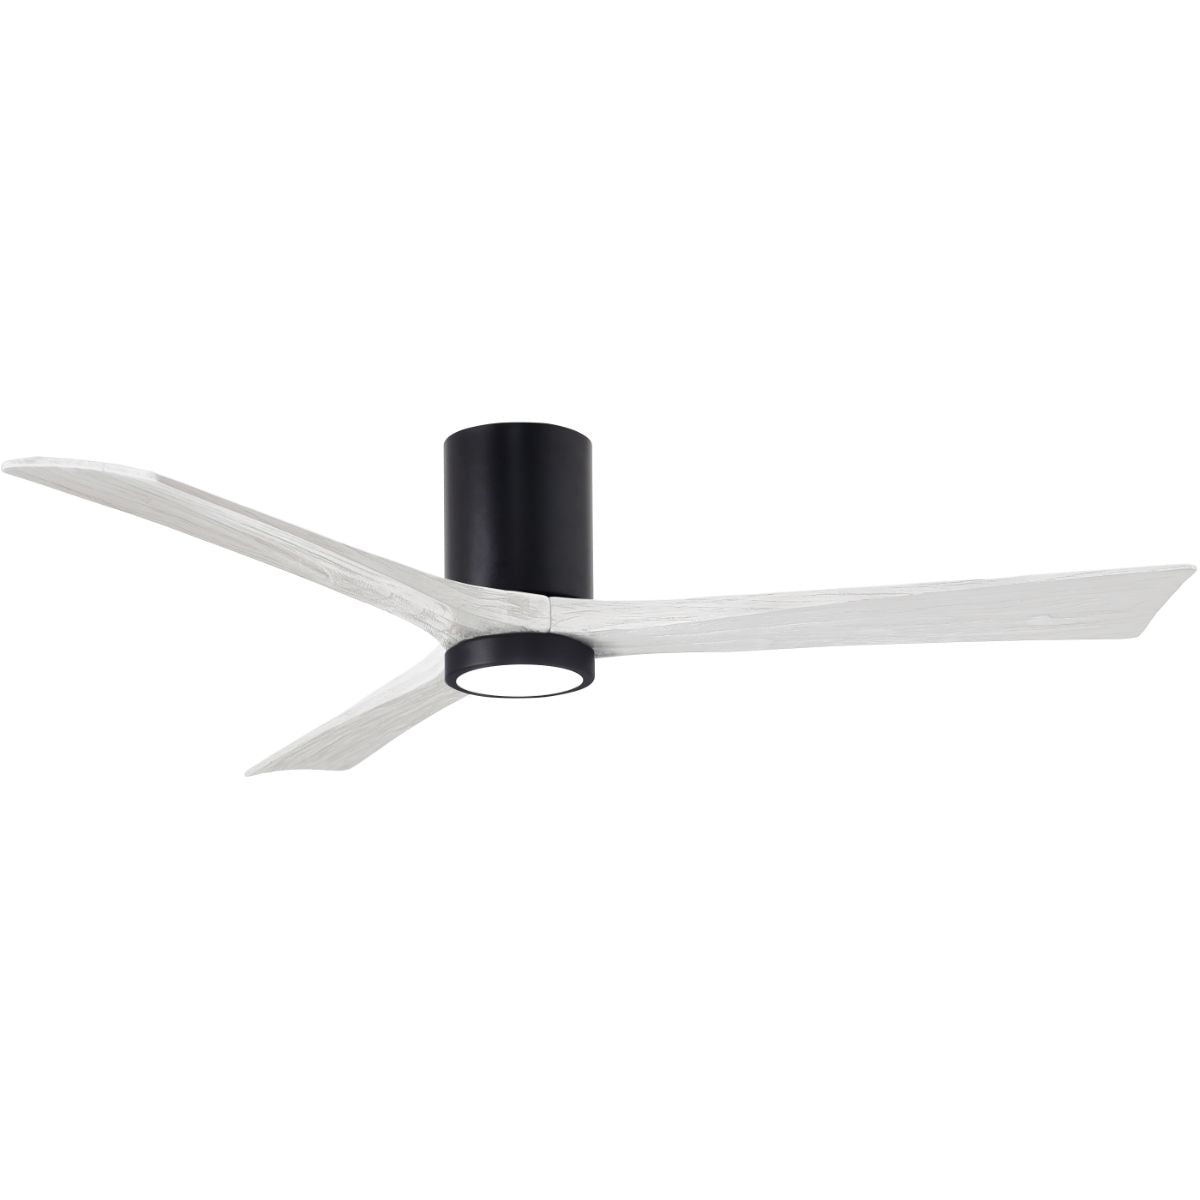 Irene 60 Inch Low Profile Outdoor Ceiling Fan With Light, Wall And Remote Control Included